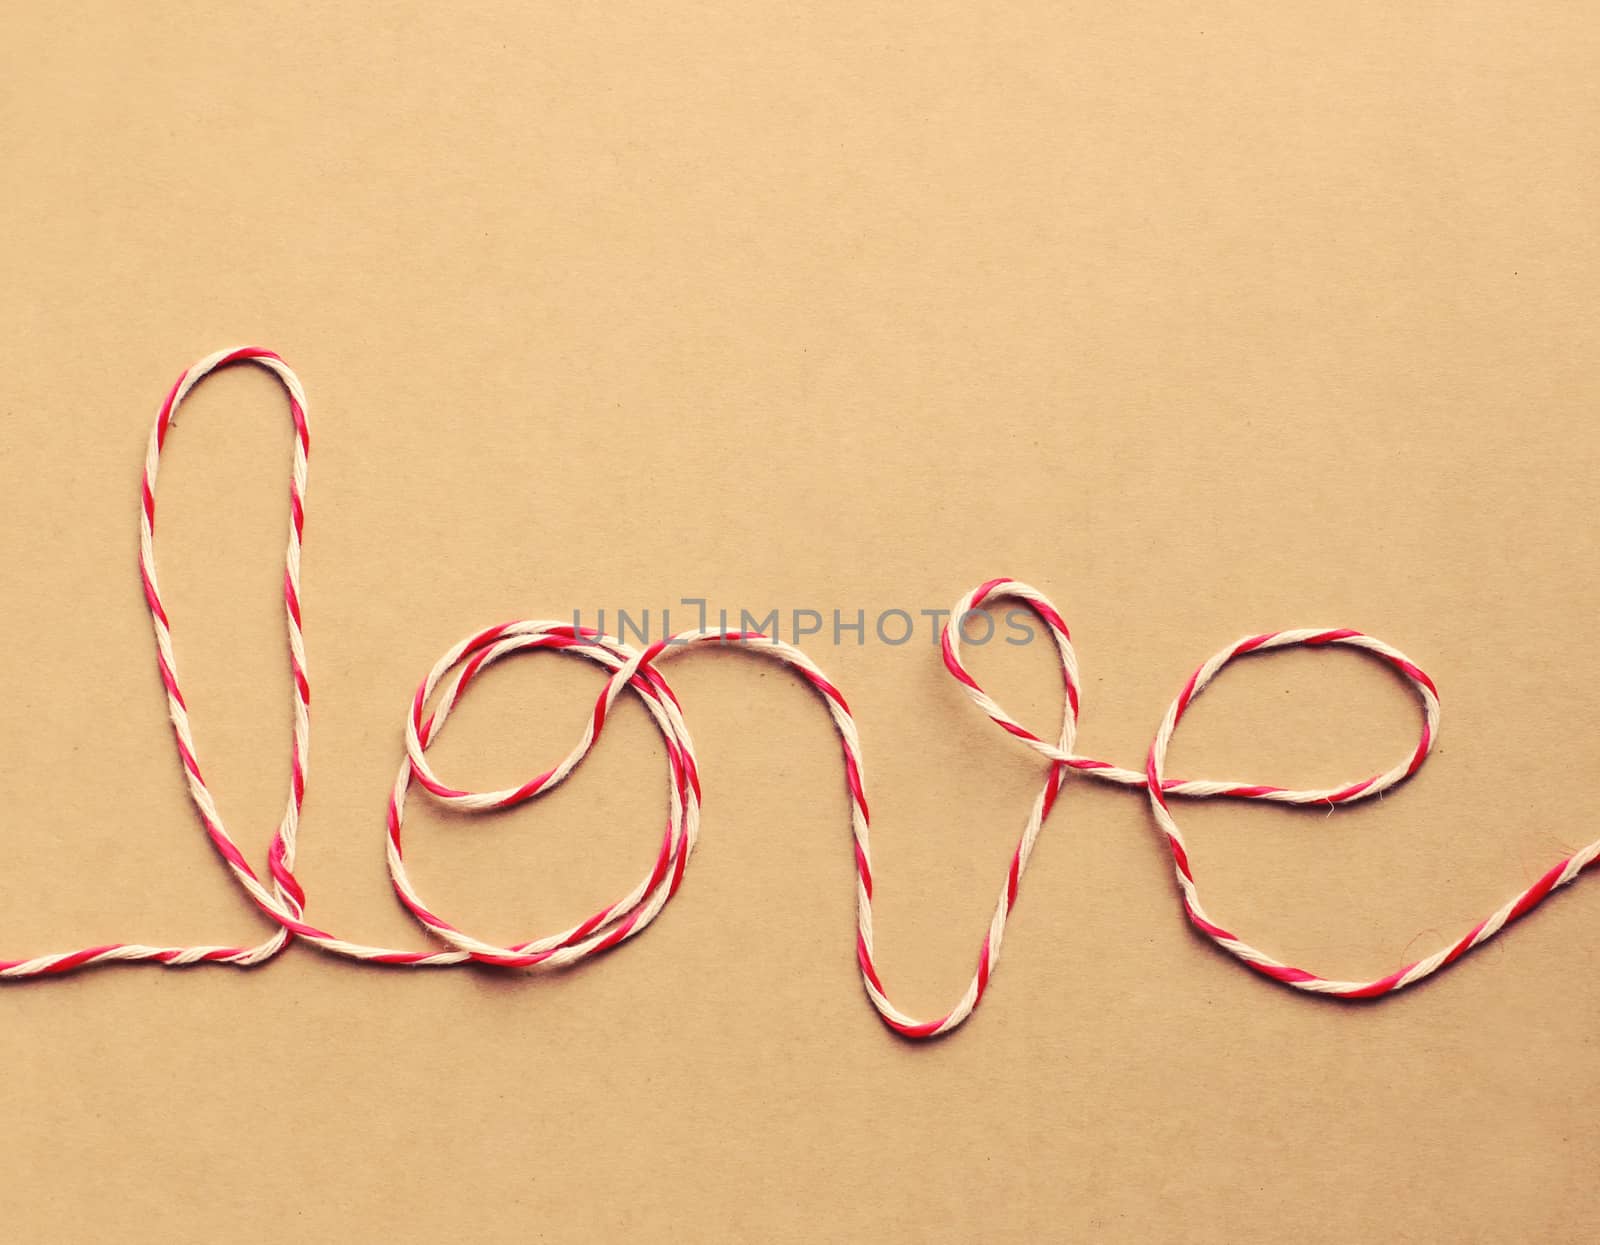 The word "love" written with rope, retro filter effect by nuchylee